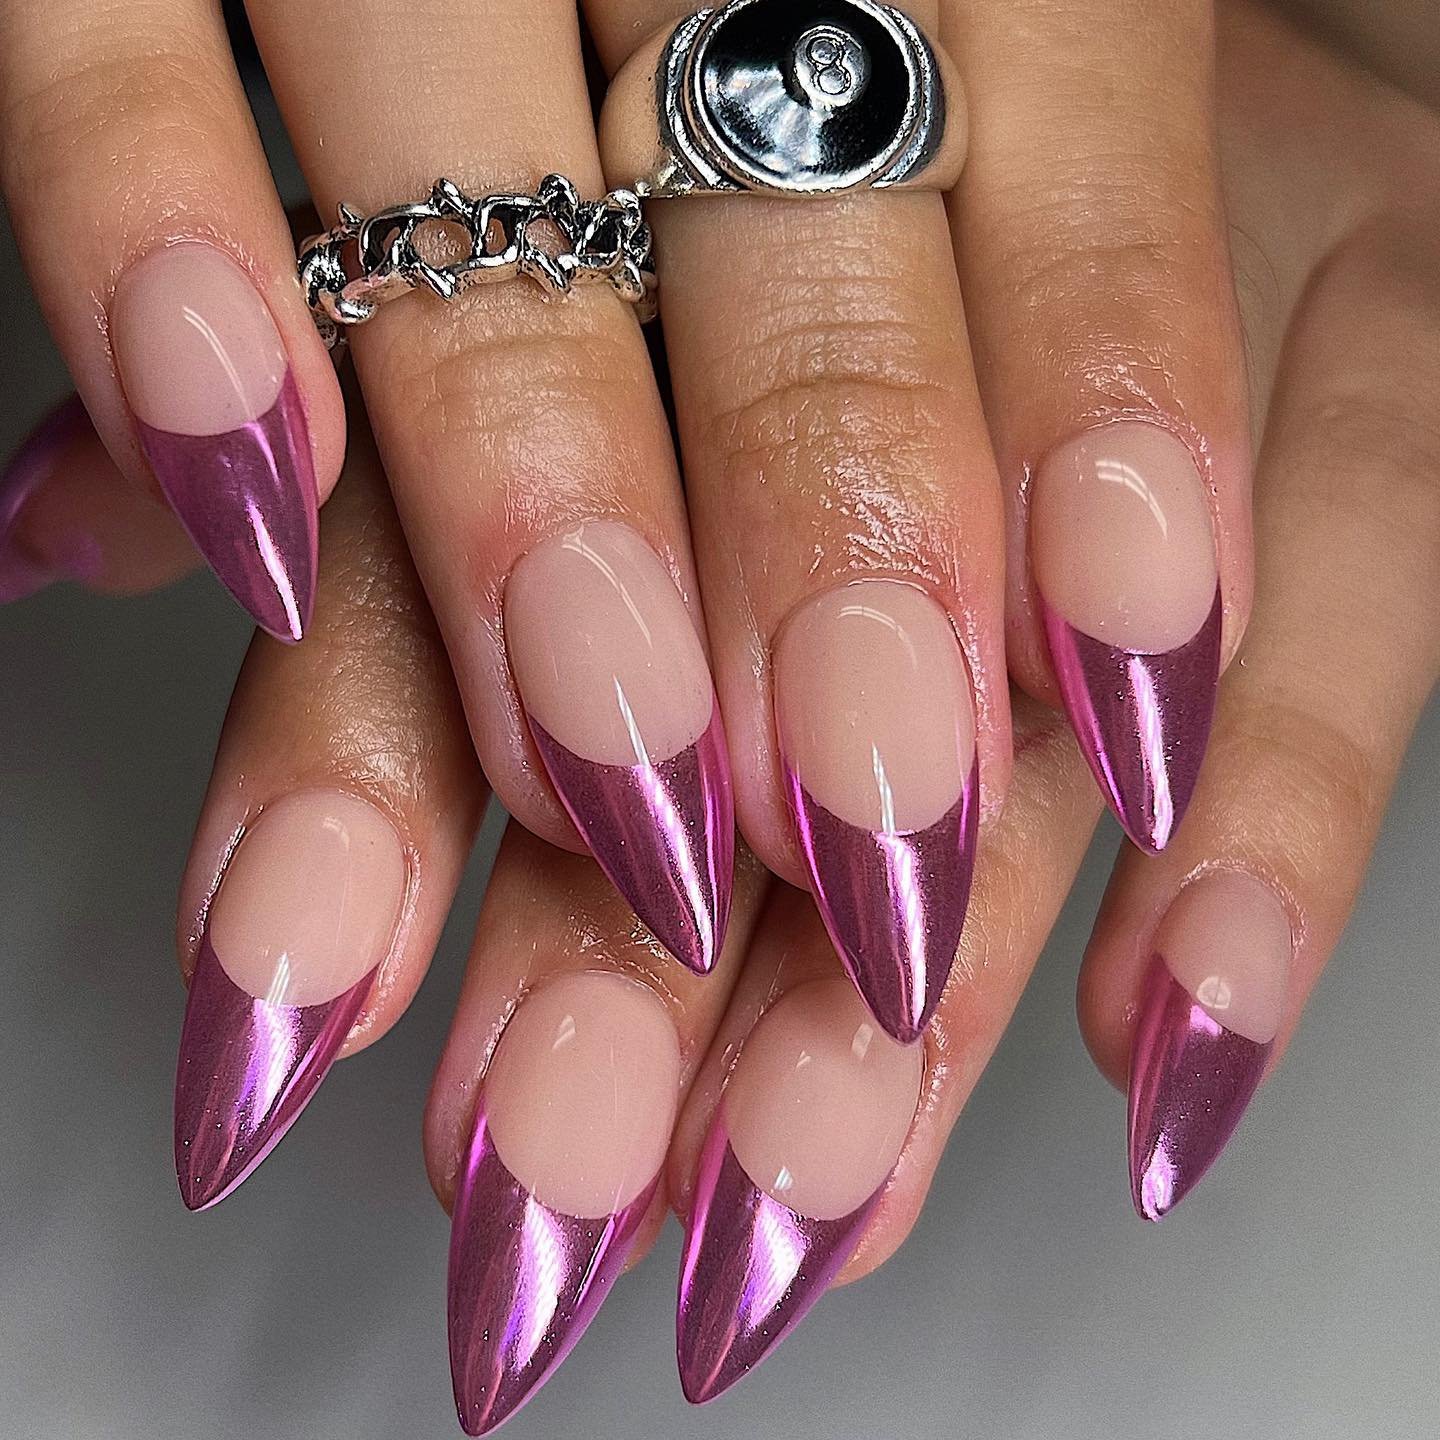 2 - Picture of Chrome Nails